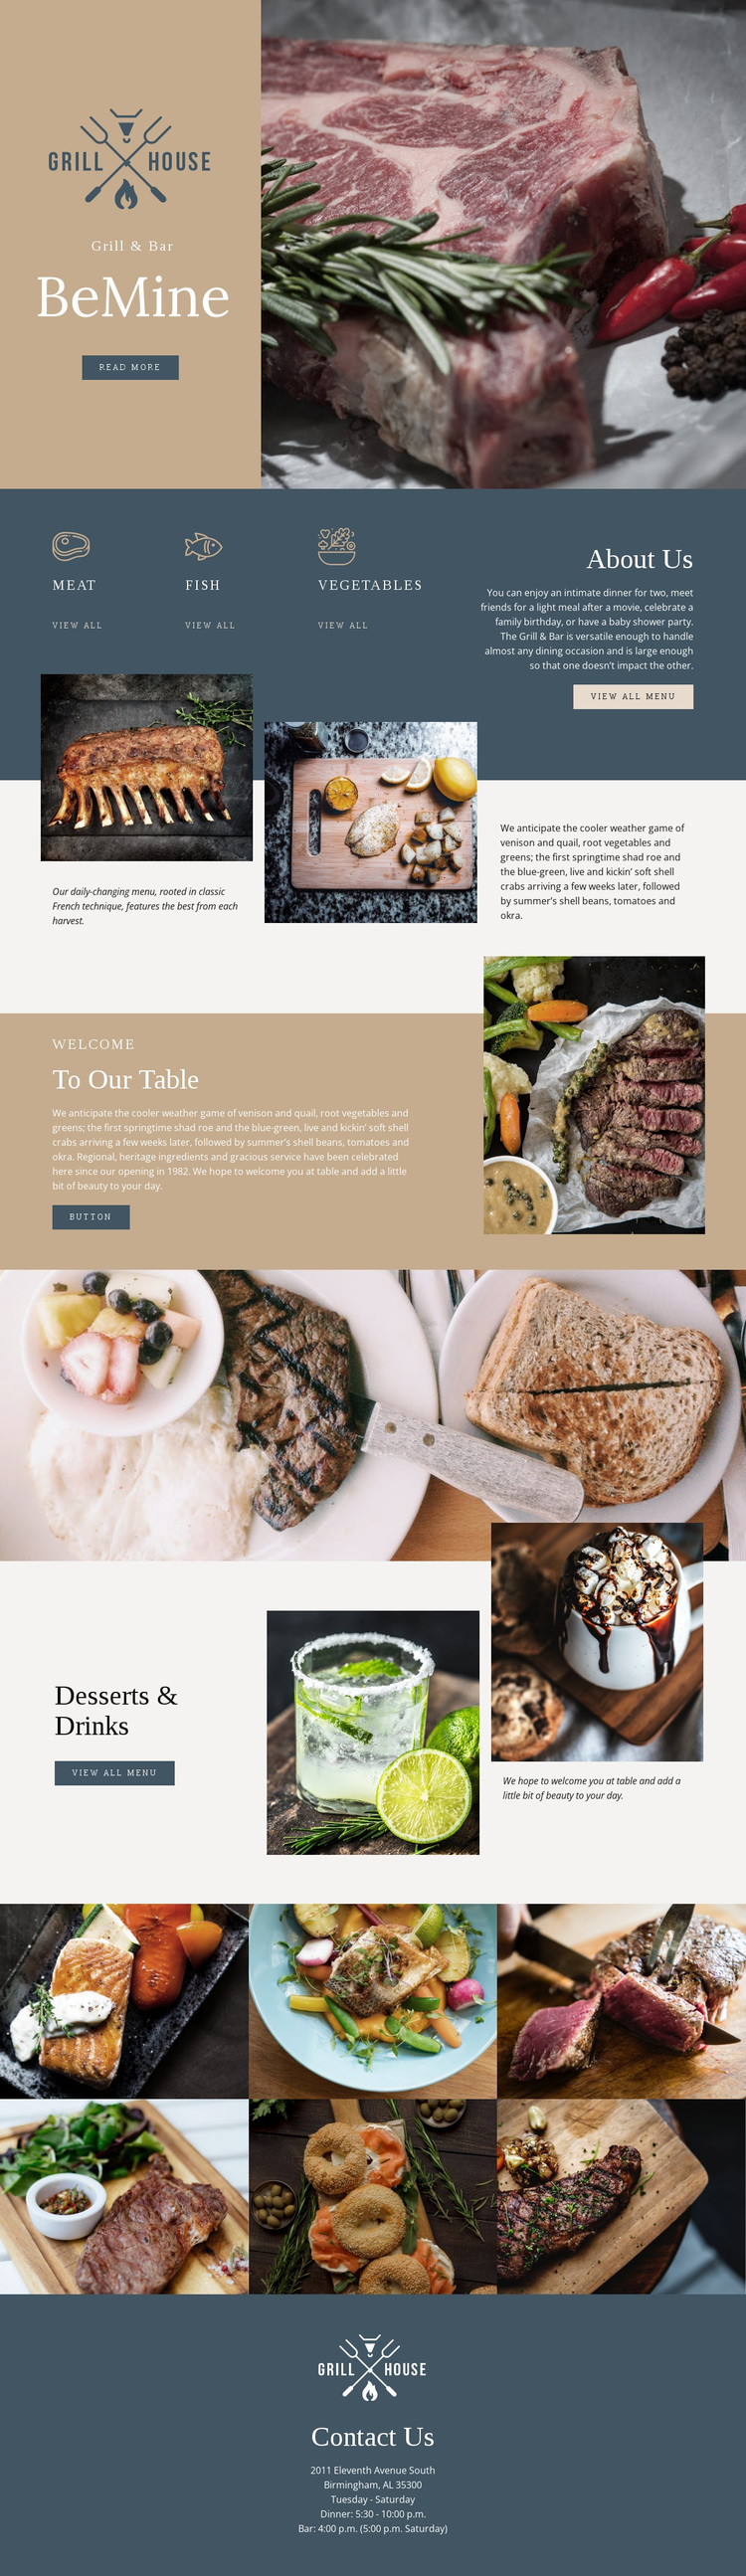 Finest grill house restaurant Template